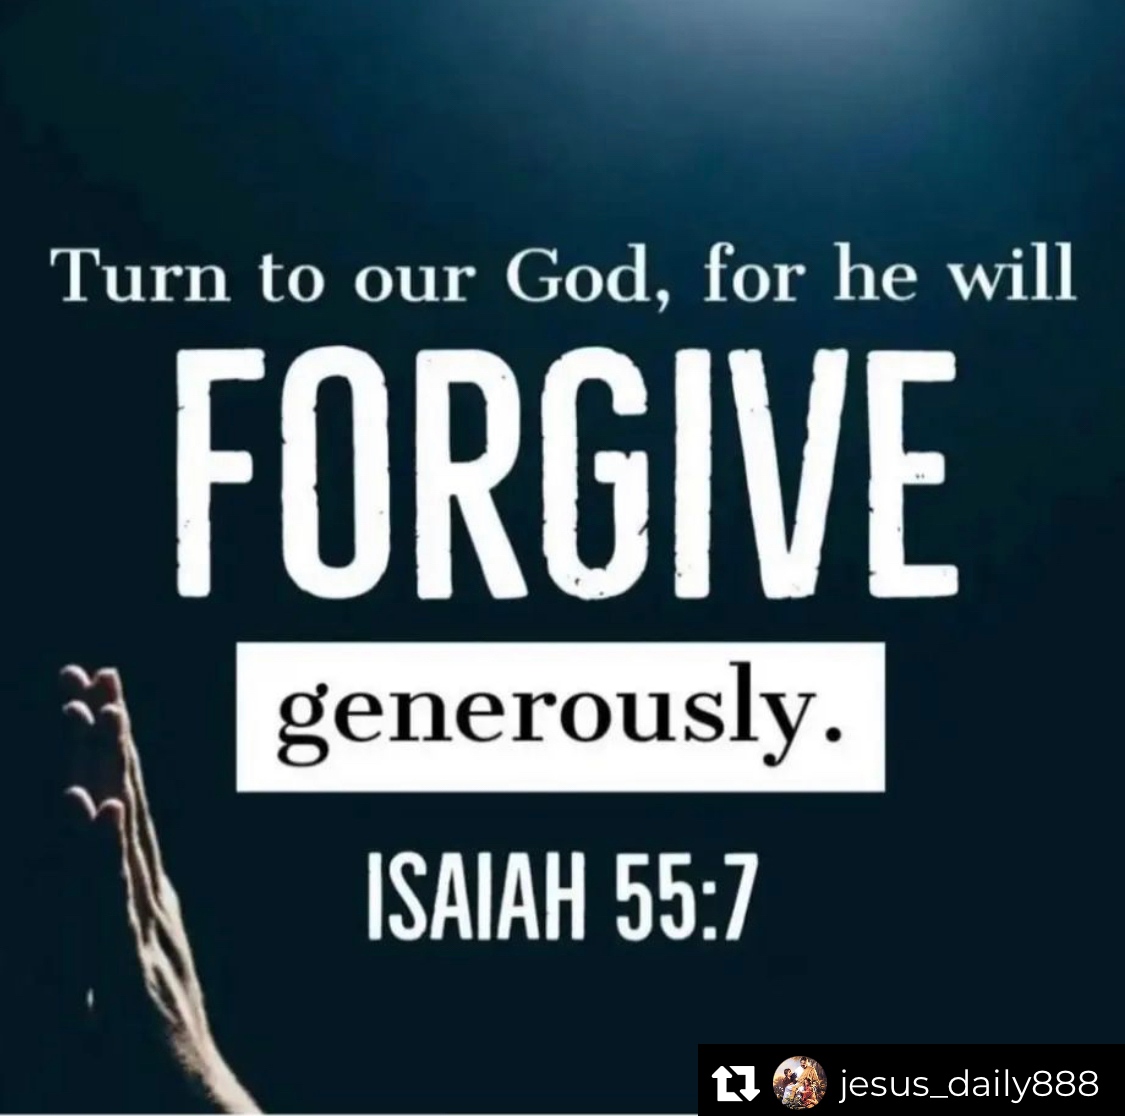 Turn to our God, for he will FORGIVE generously ISAIAH 55.7 t7 jesus_daily888